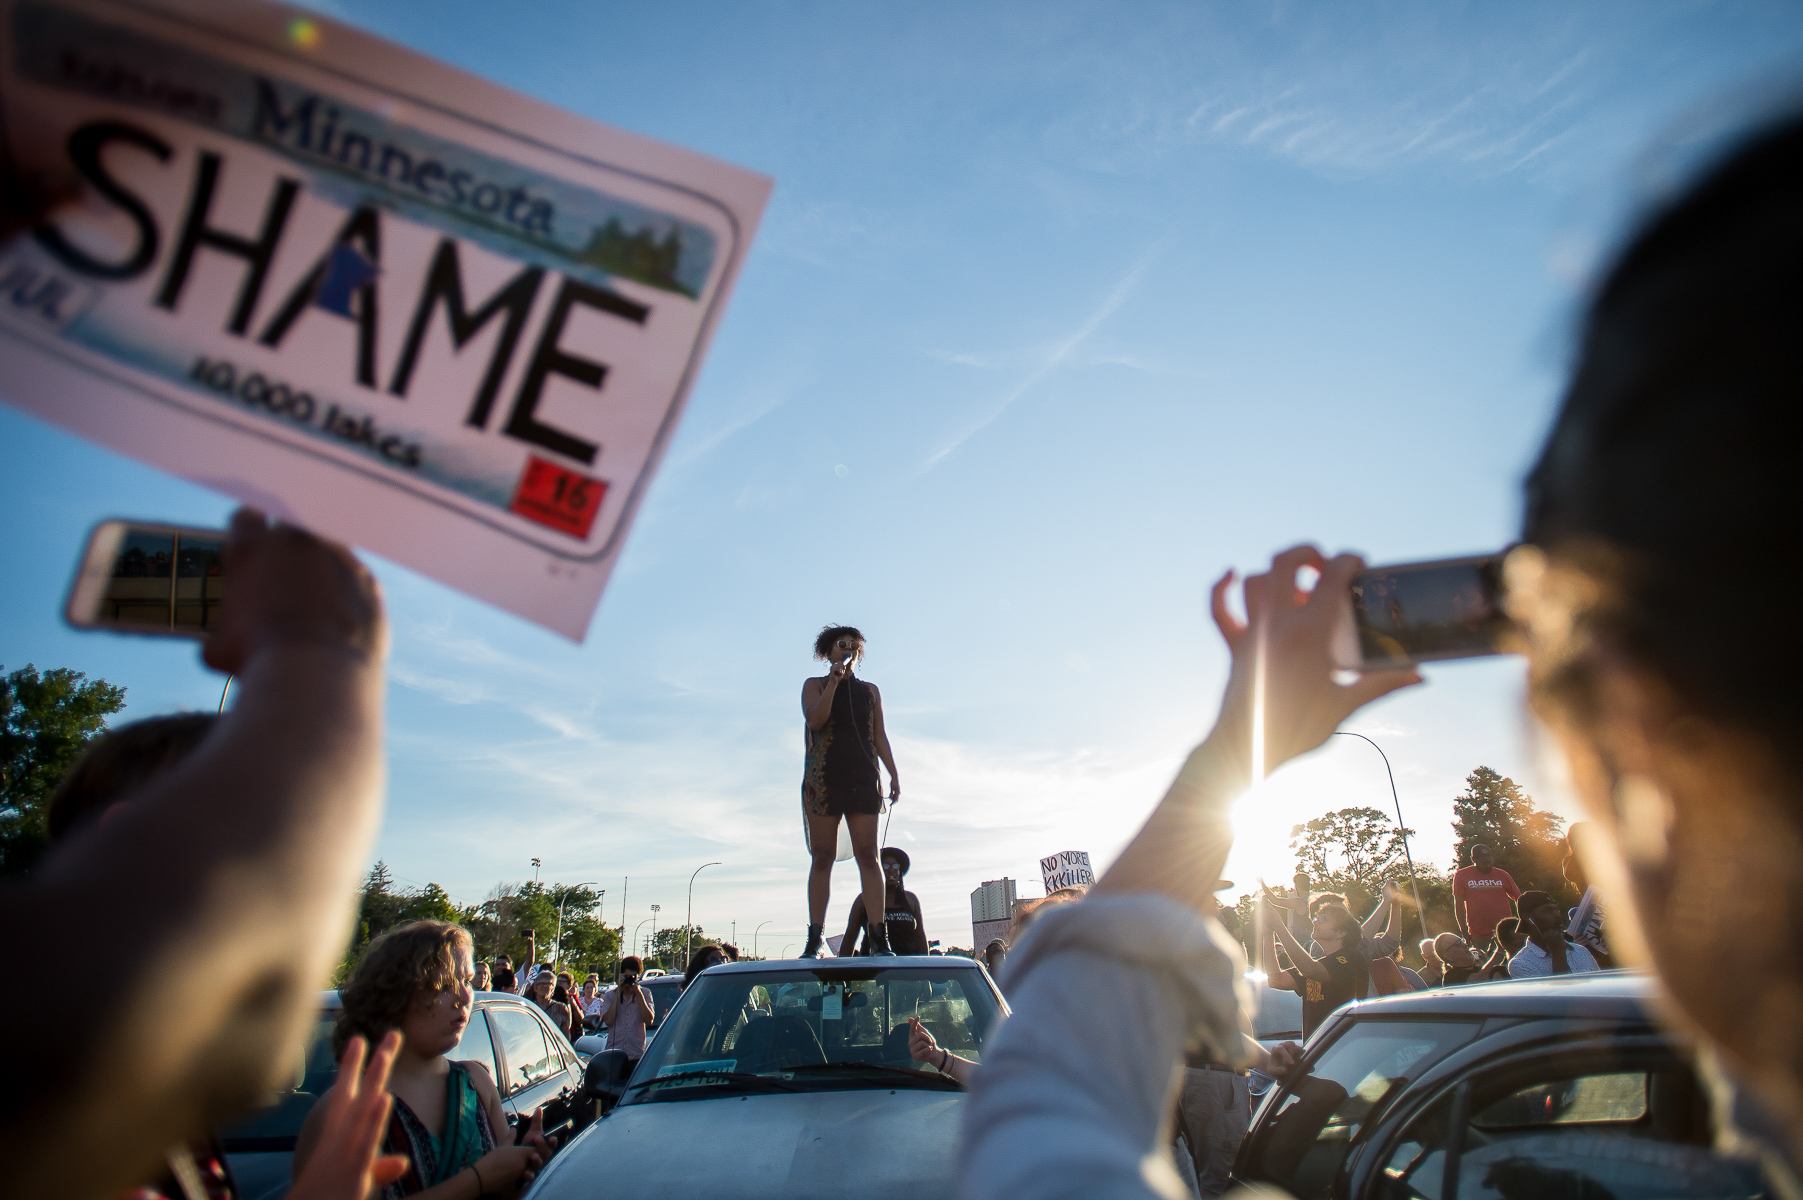 Mica Grimm speaks to a crowd of protesters that marched onto the freeway, shutting down Interstate 94 in St. Paul, Minnesota, USA on July 9, 2016, for several hours. Demonstrators marched in protest of the police killing of Philando Castile. On July 6, 2016, Philando Castile was shot and killed by a police officer during a traffic stop in Falcon Heights, MN. His death was broadcast on Facebook live by his girlfriend, Diamond Reynolds. The event sparked protests nationwide.